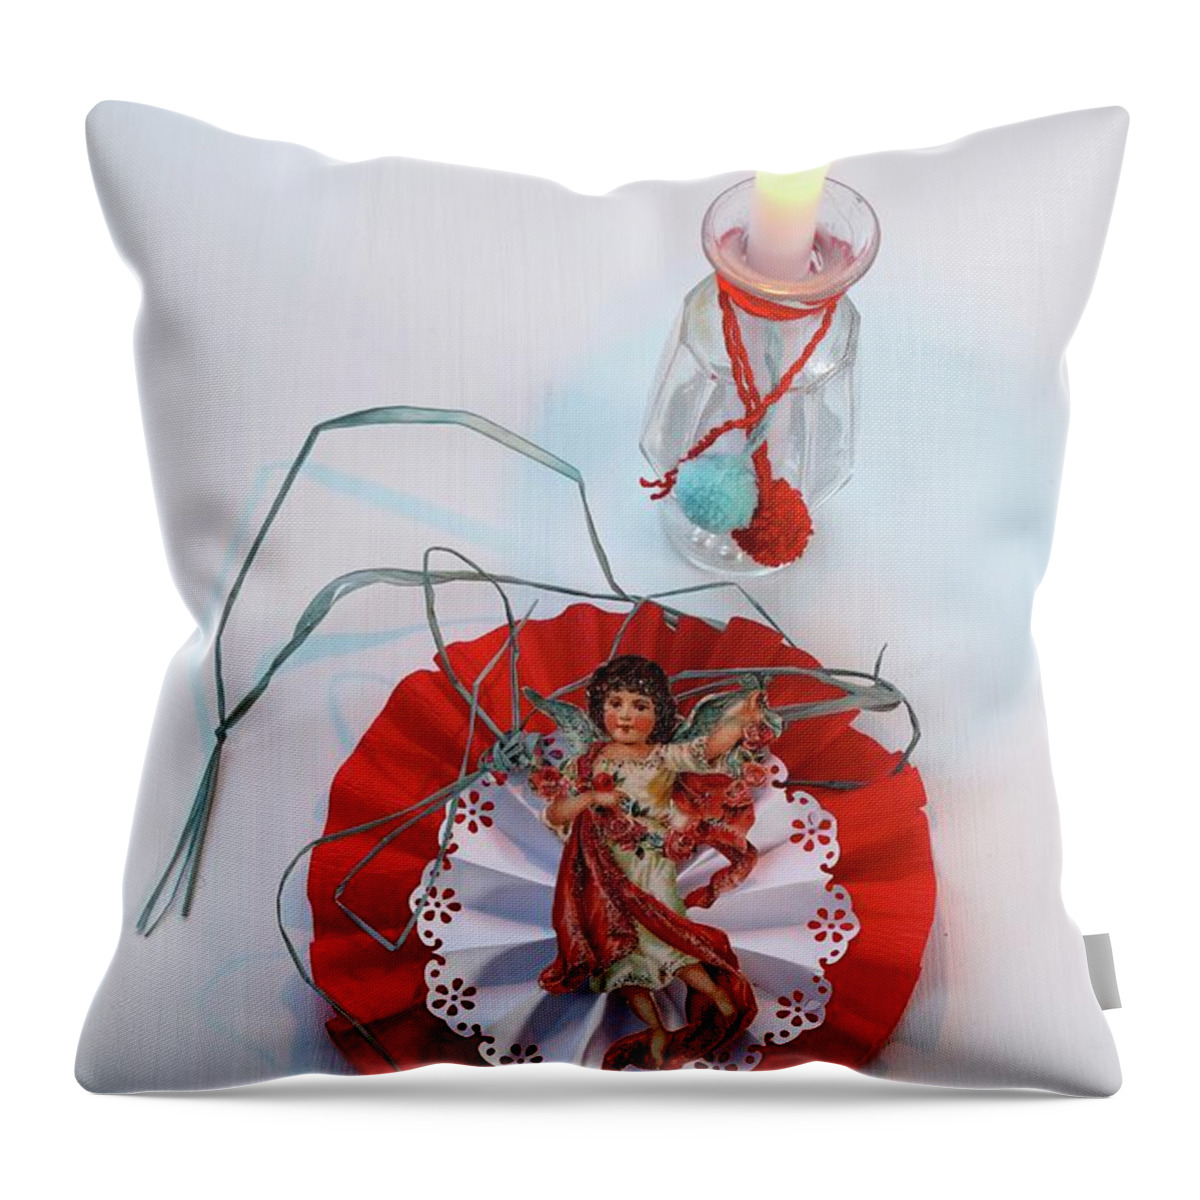 Ip_11293547 Throw Pillow featuring the photograph Festively Decorated Glass Vase Used As Candlestick And Paper Decoration With Angel by Regina Hippel